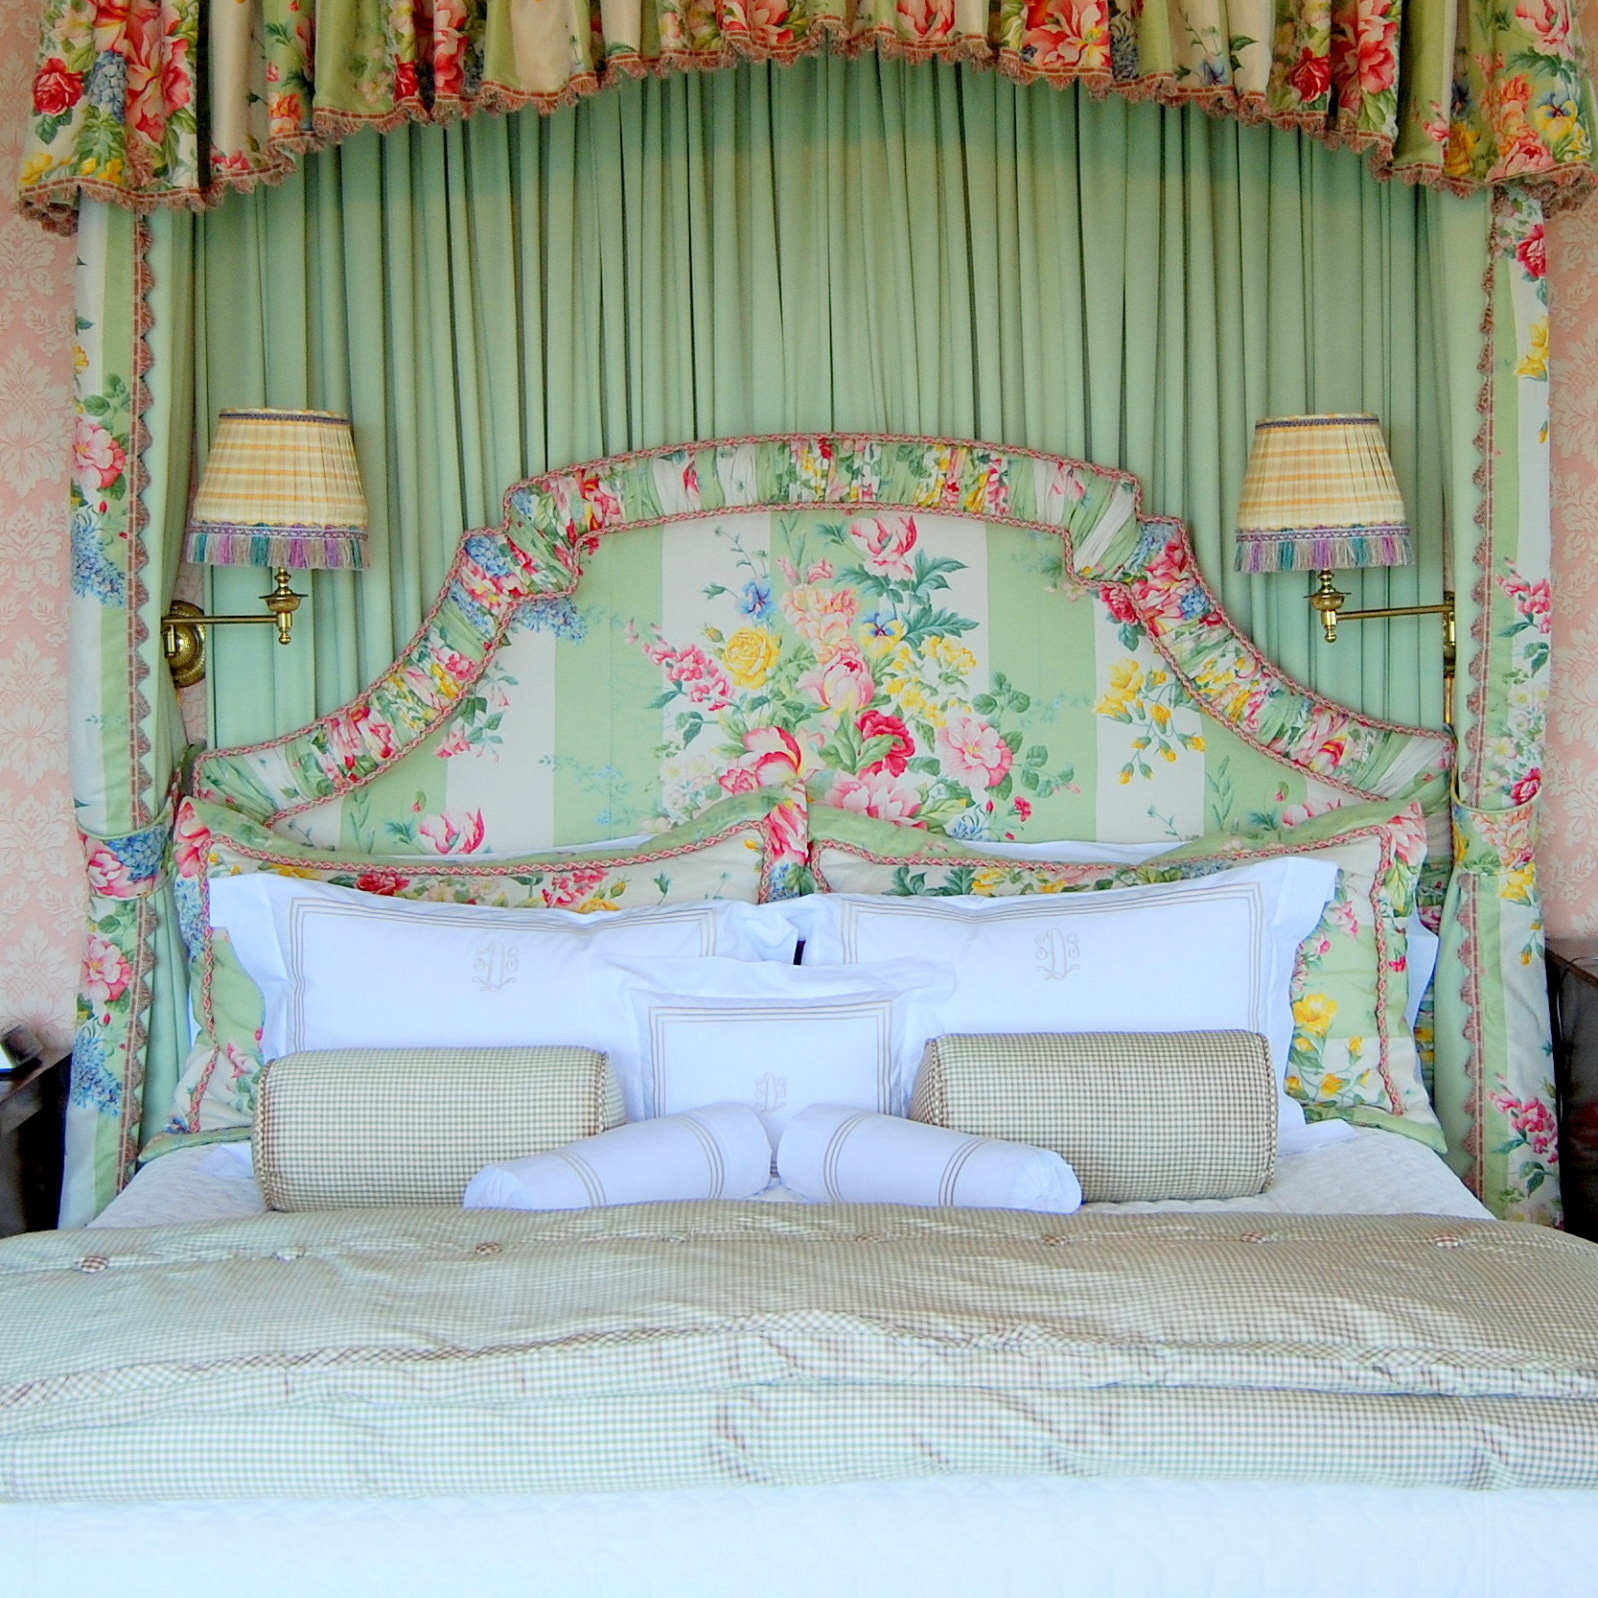 Multi-colored bed frame with floral pattern